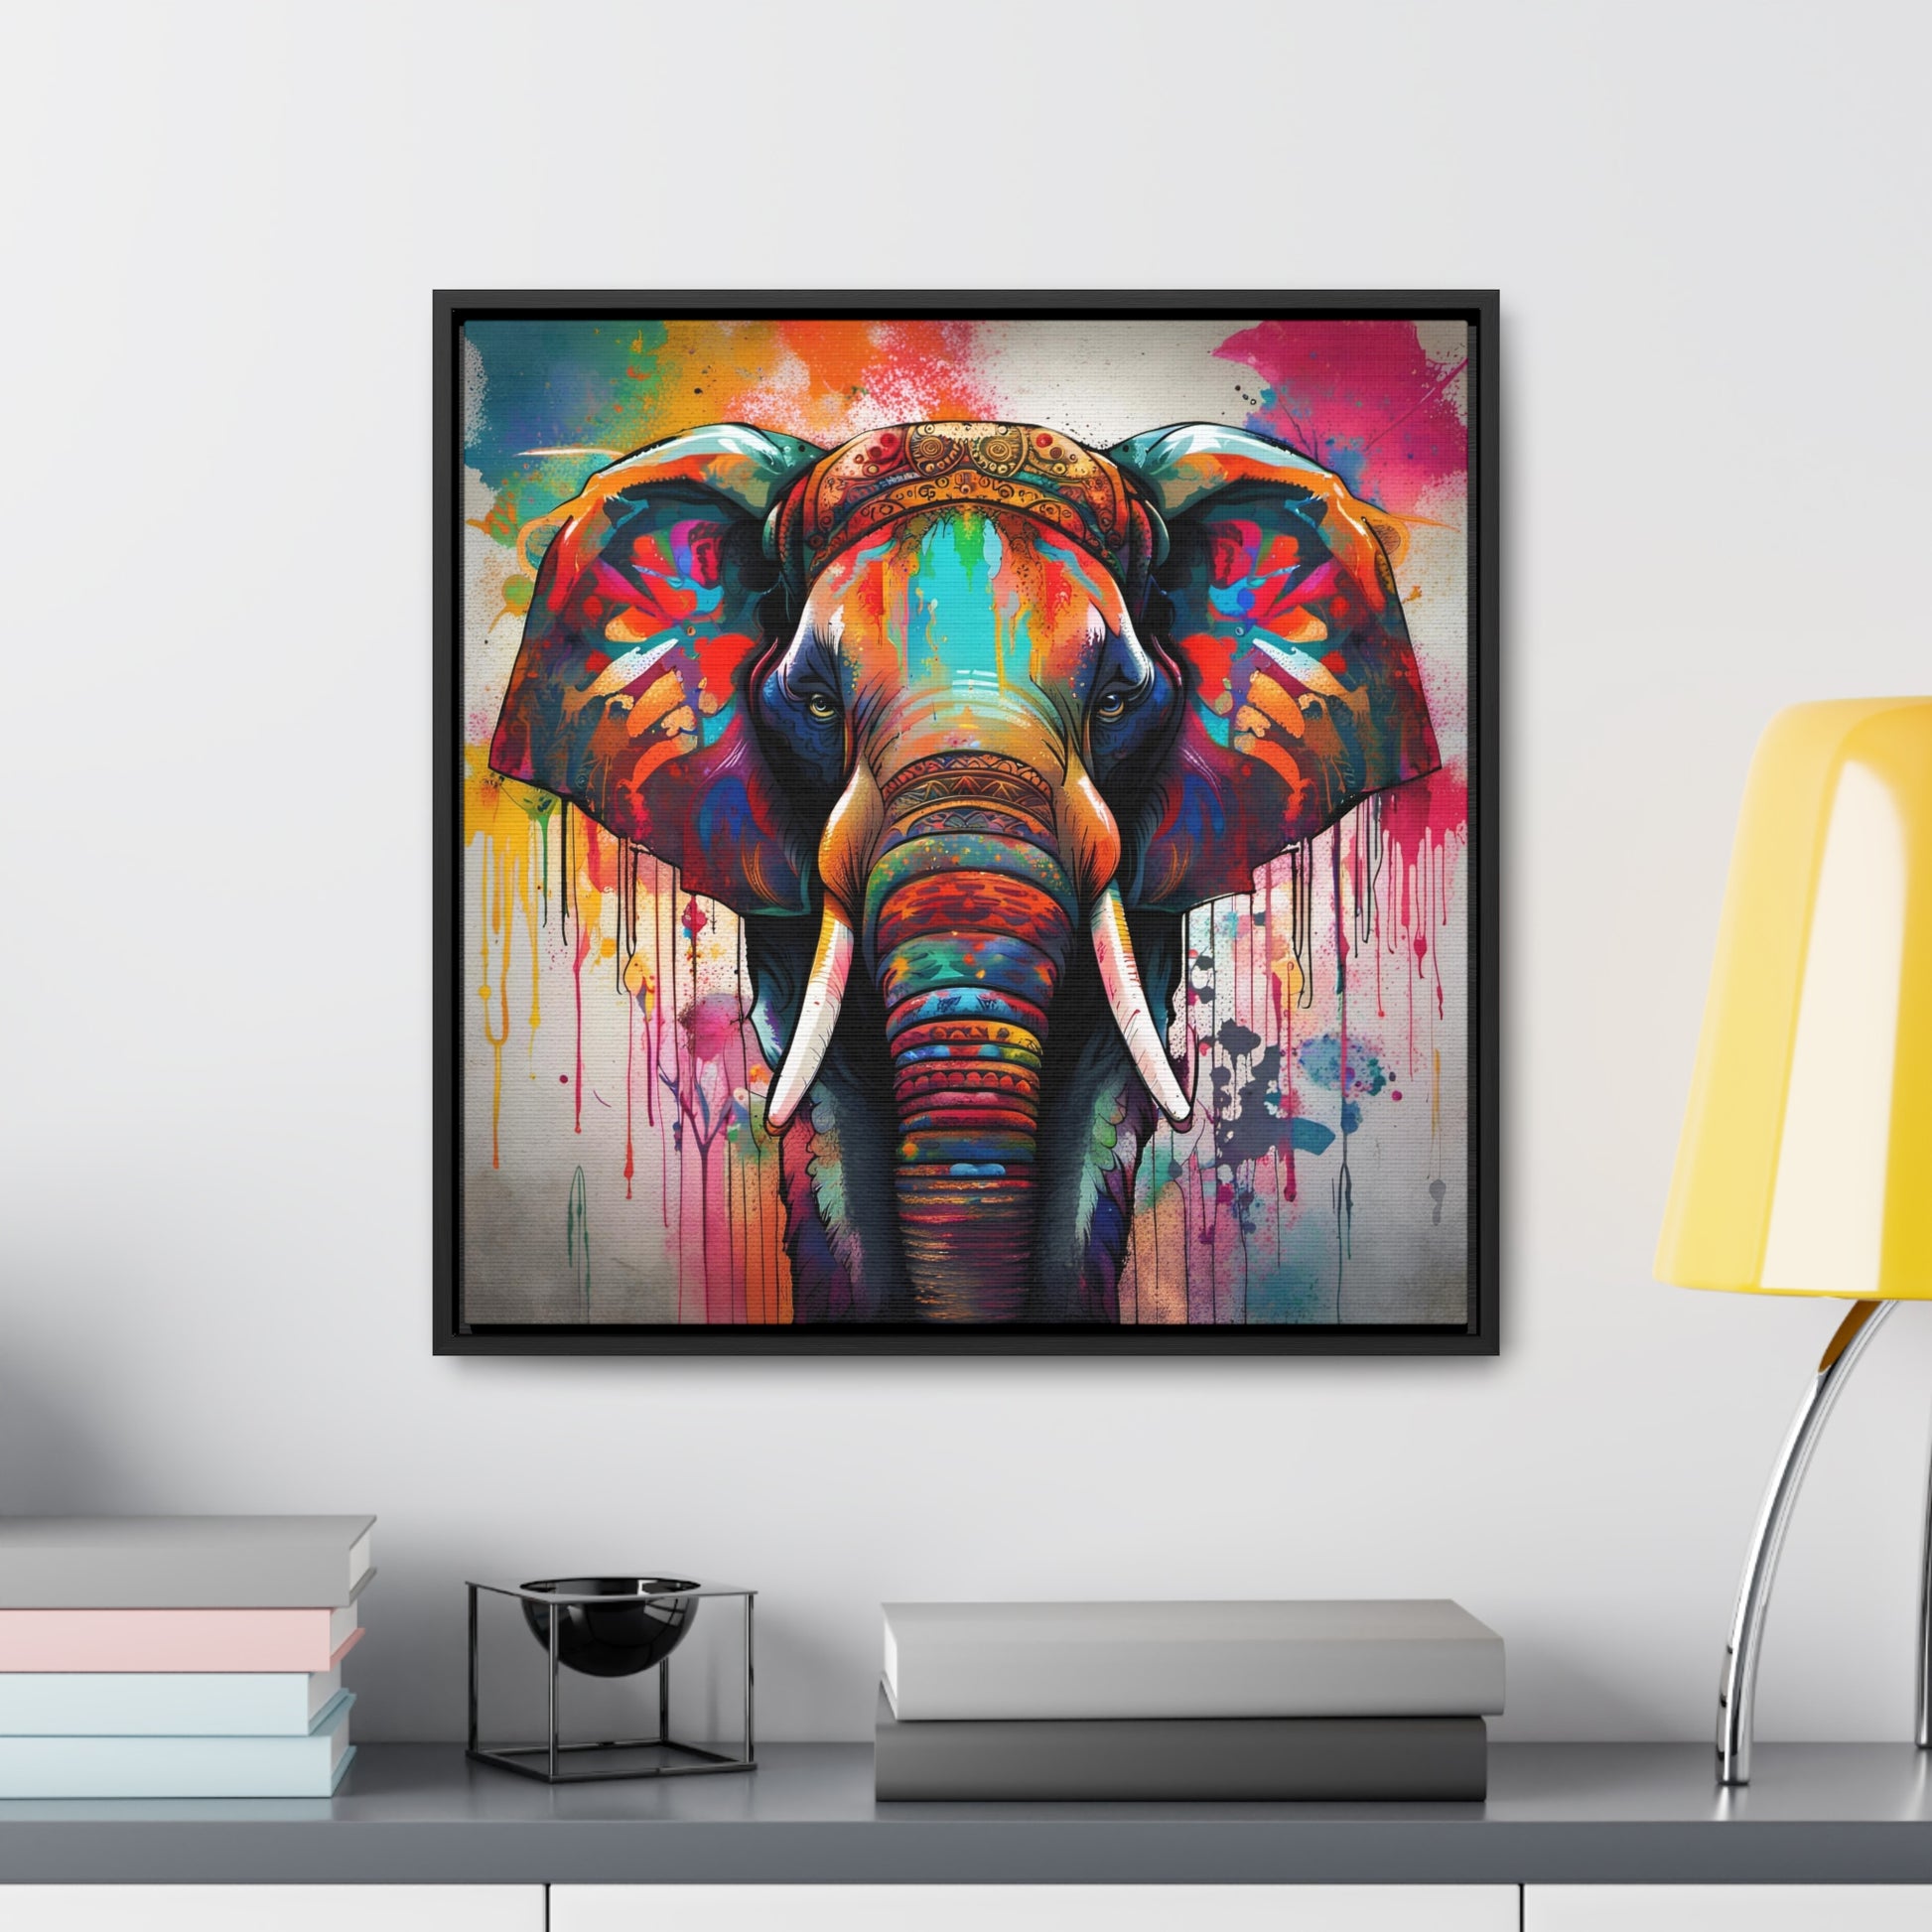 Dripping Colors Indian Elephant Print on Canvas in a Floating Frame 20x20